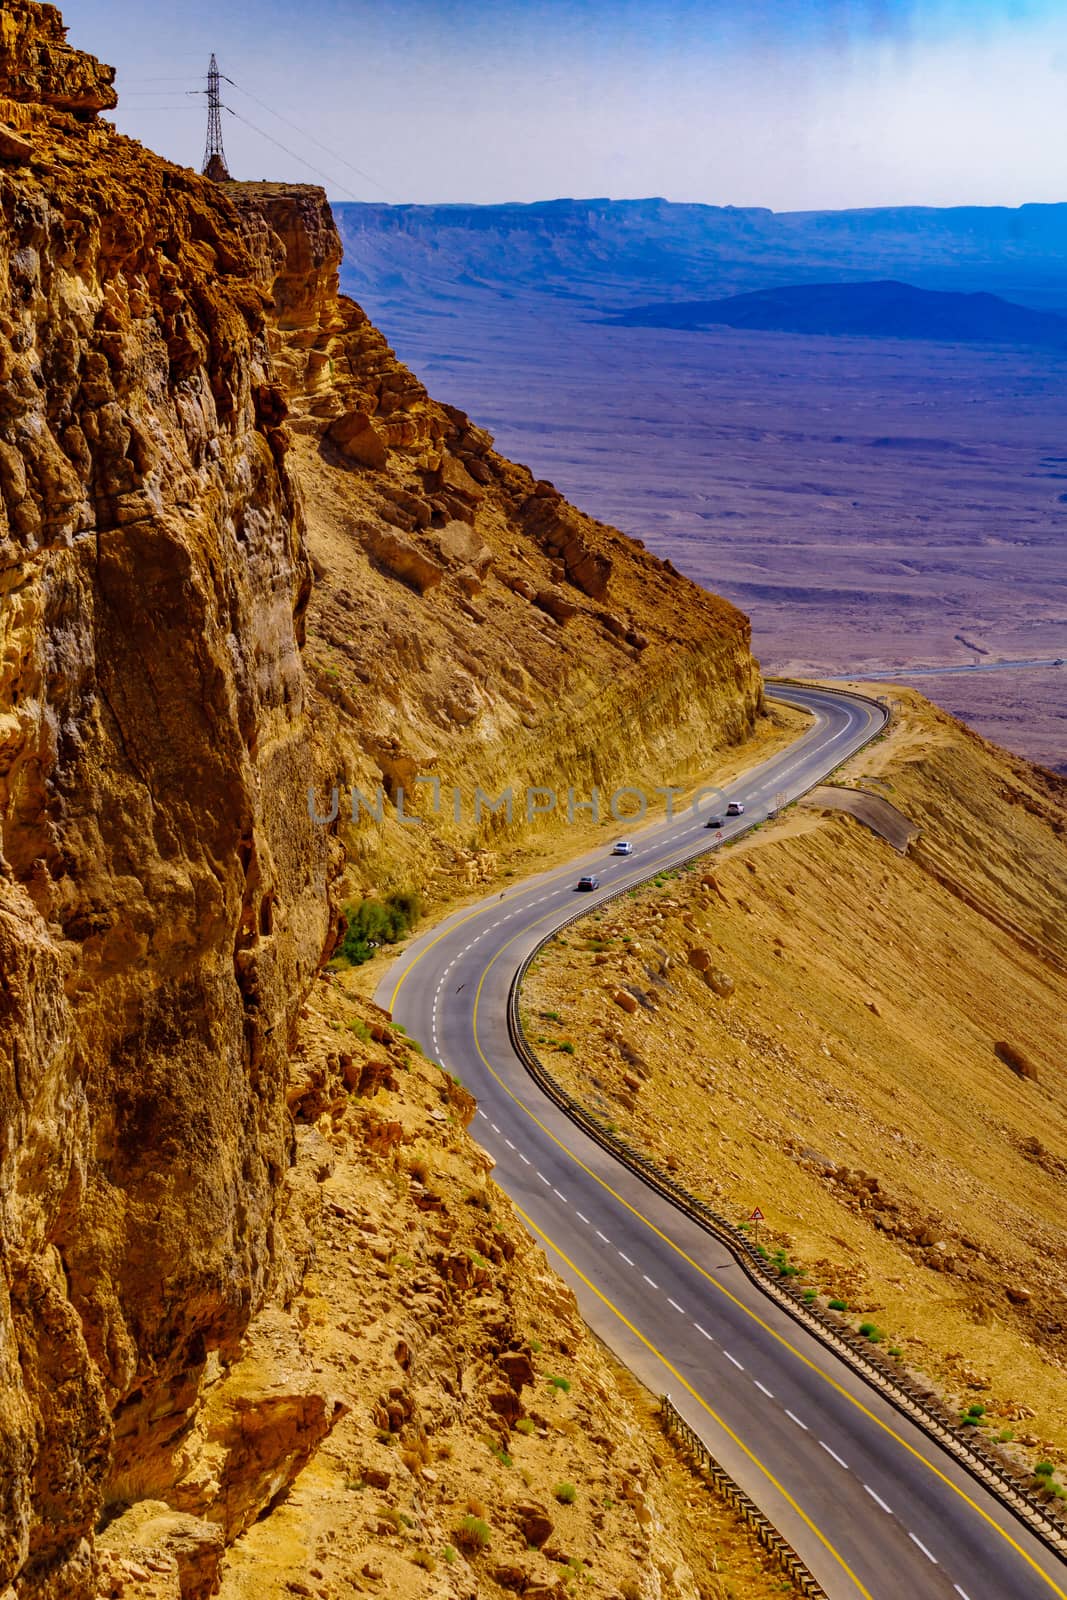 Cliffs, landscape, and road in Makhtesh (crater) Ramon by RnDmS